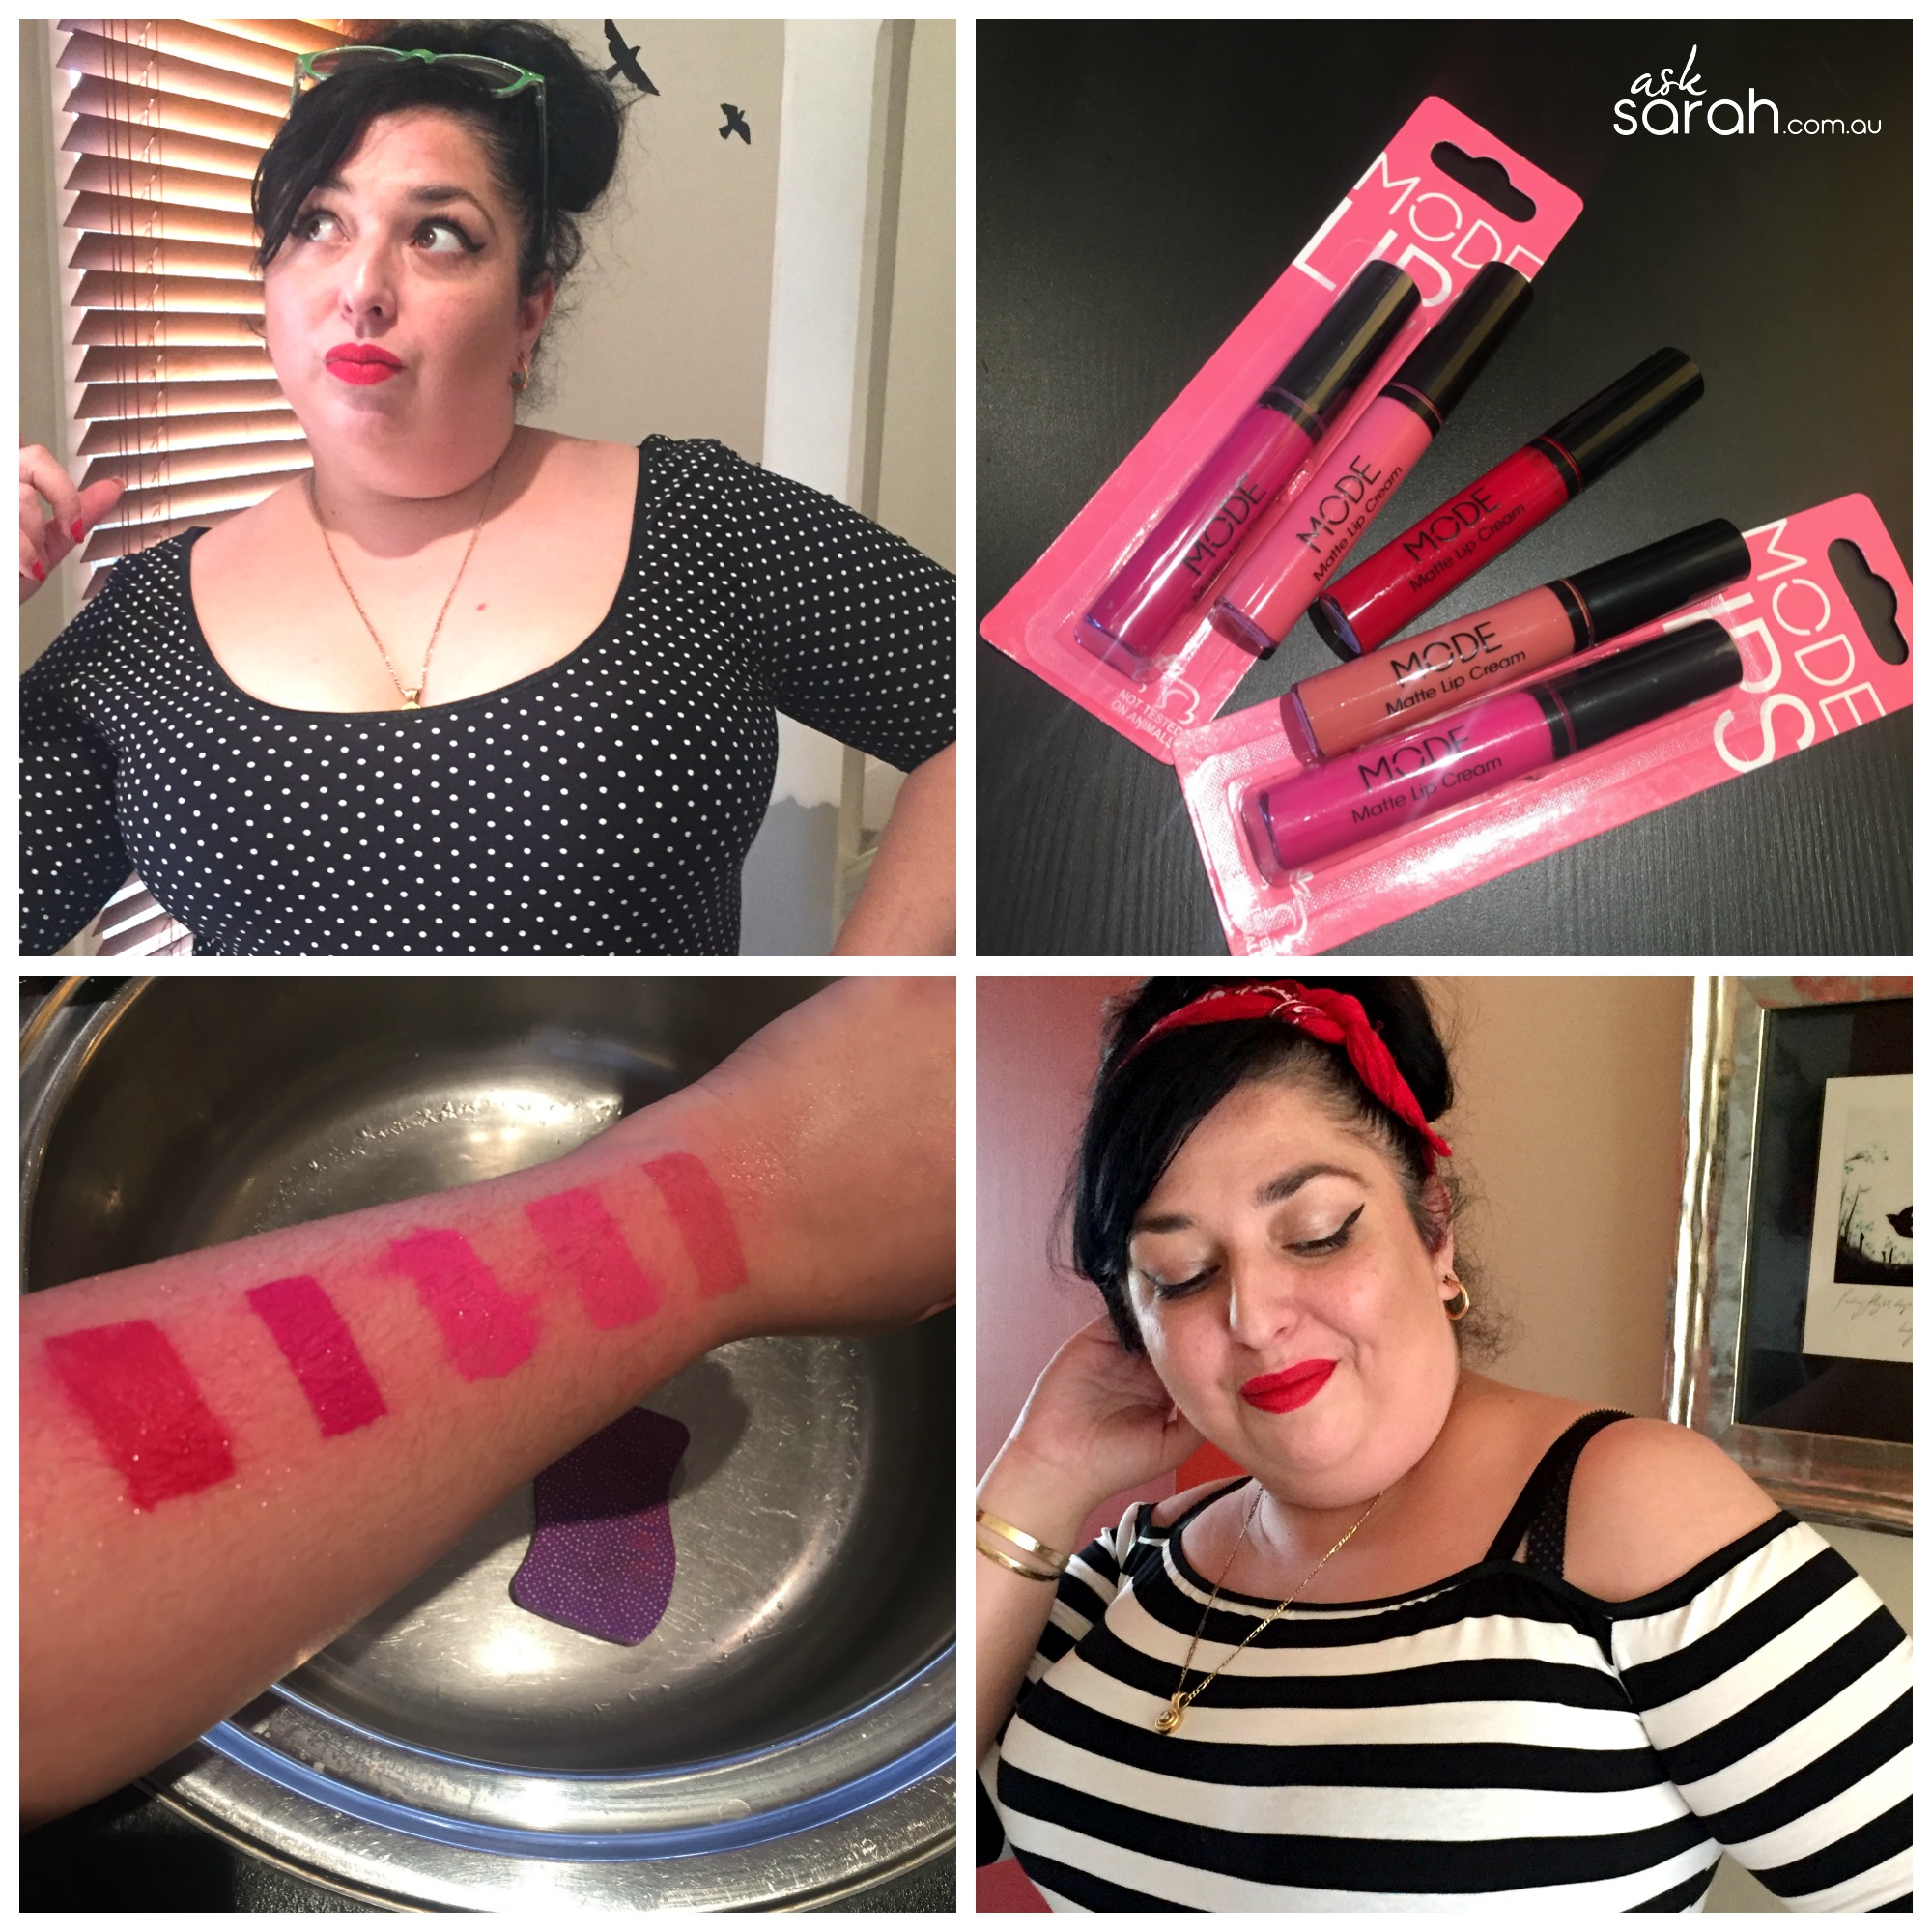 Glam: Can You Buy A Great Liquid Lipstick for $3? {I Tested It Out For You & Science}